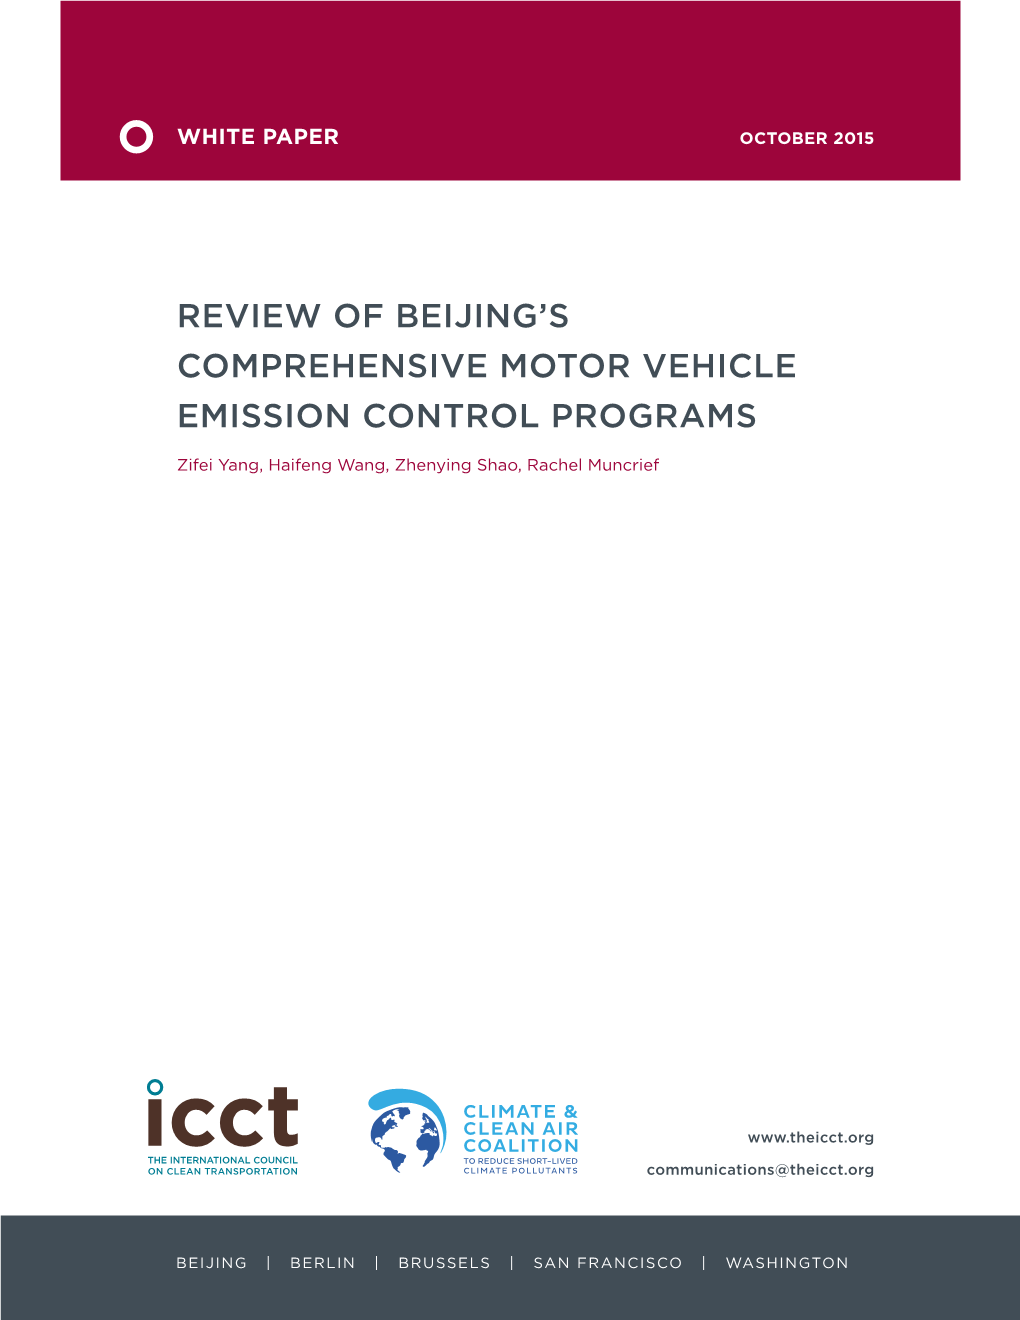 Review of Beijing's Comprehensive Motor Vehicle Emission Control